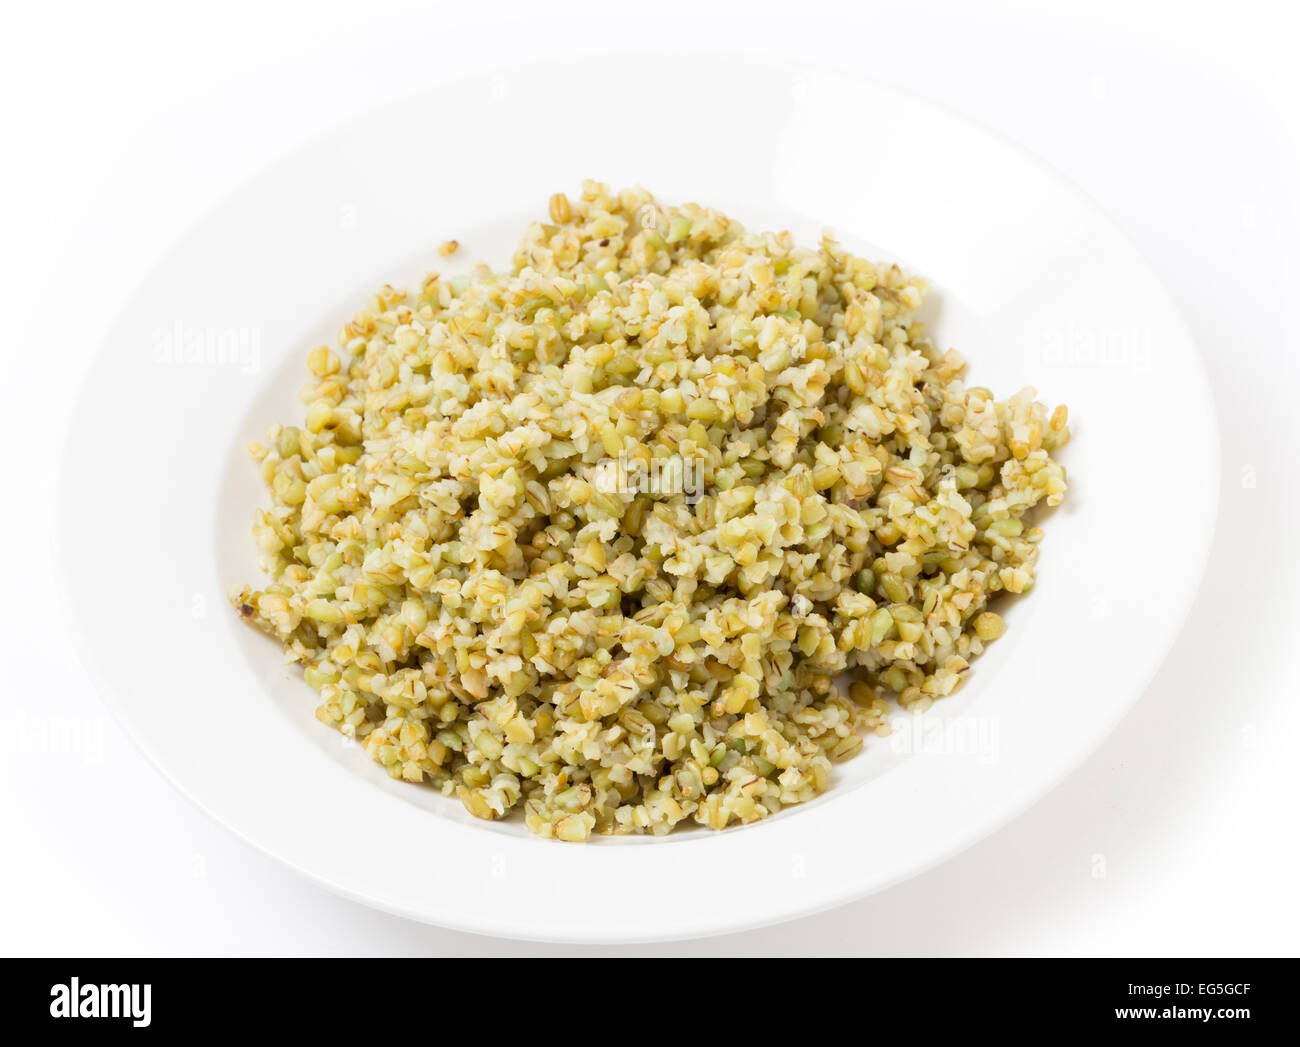 A bowl of freshly boiled cracked freekeh scorched green wheat grains, one of the 'paleo superfoods'. It can be eaten as it is or Stock Photo